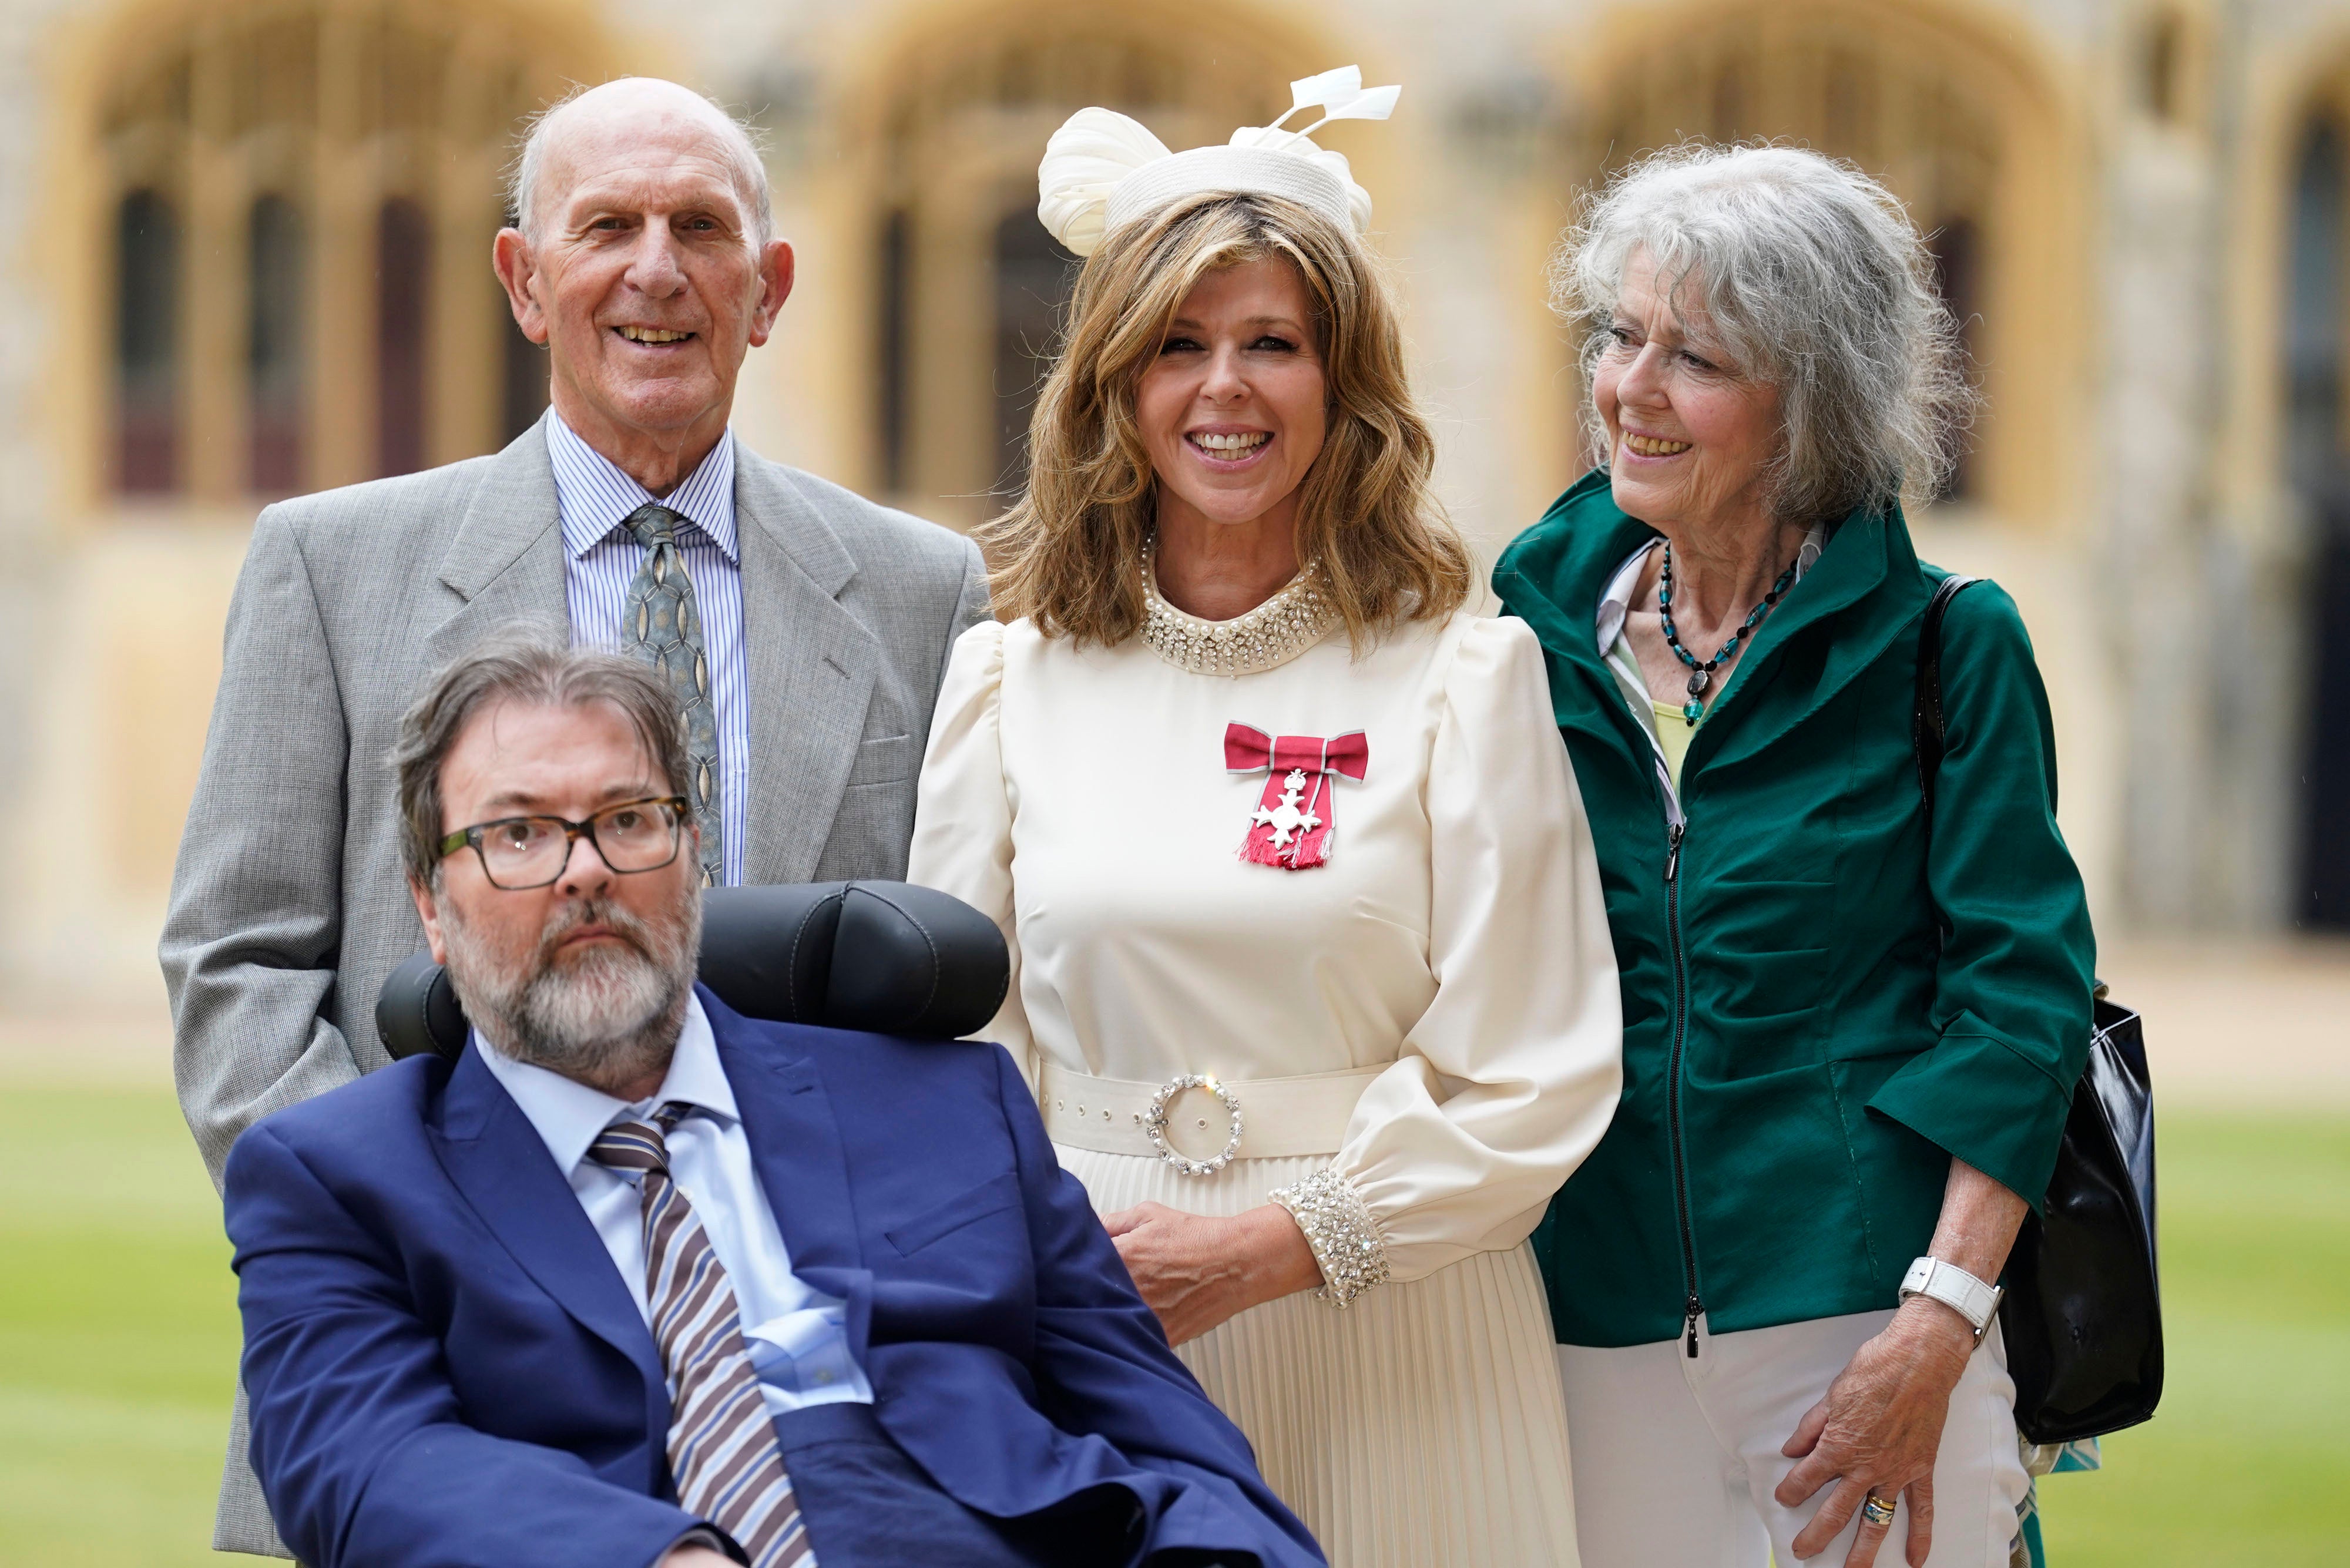 Derek Draper watches as his wife Kate Garraway collects her MBE from Prince William